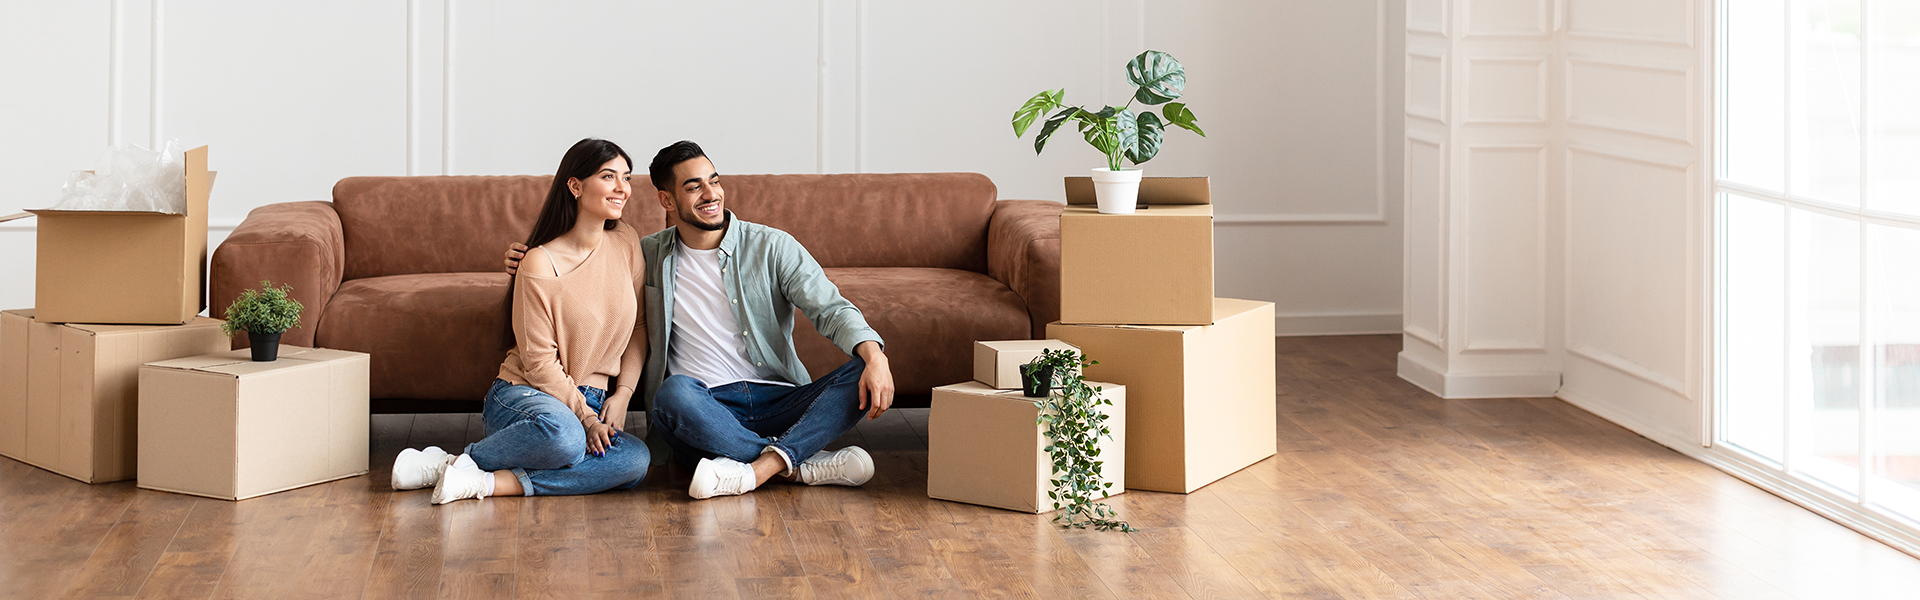 a couple sitting in a living room with plants and moving boxes